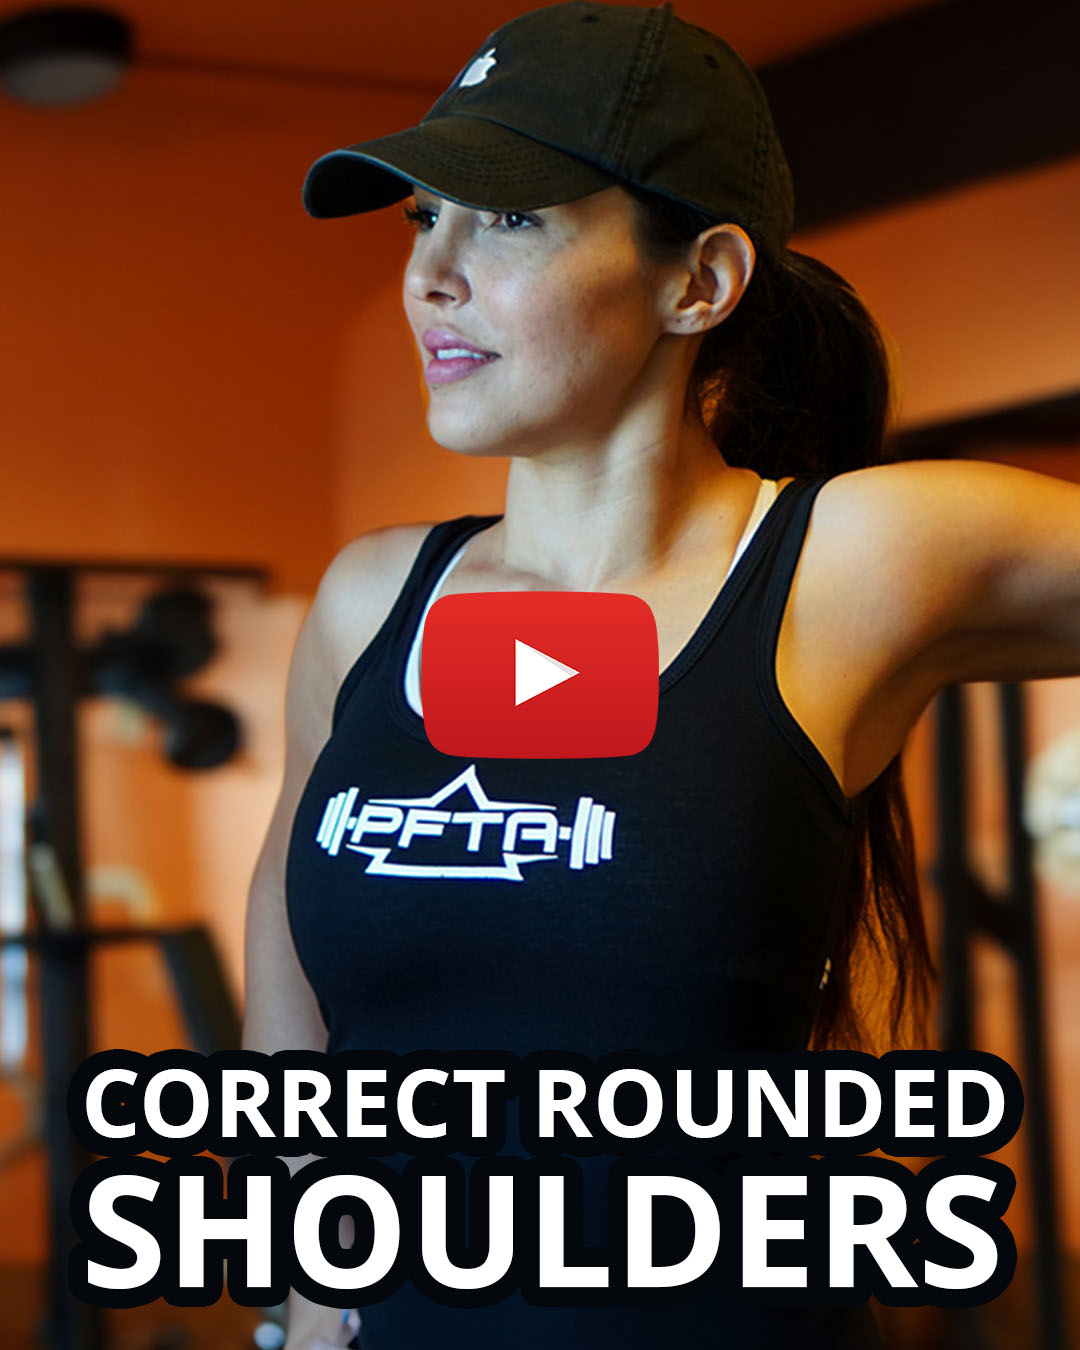 Correcting Rounded Shoulders